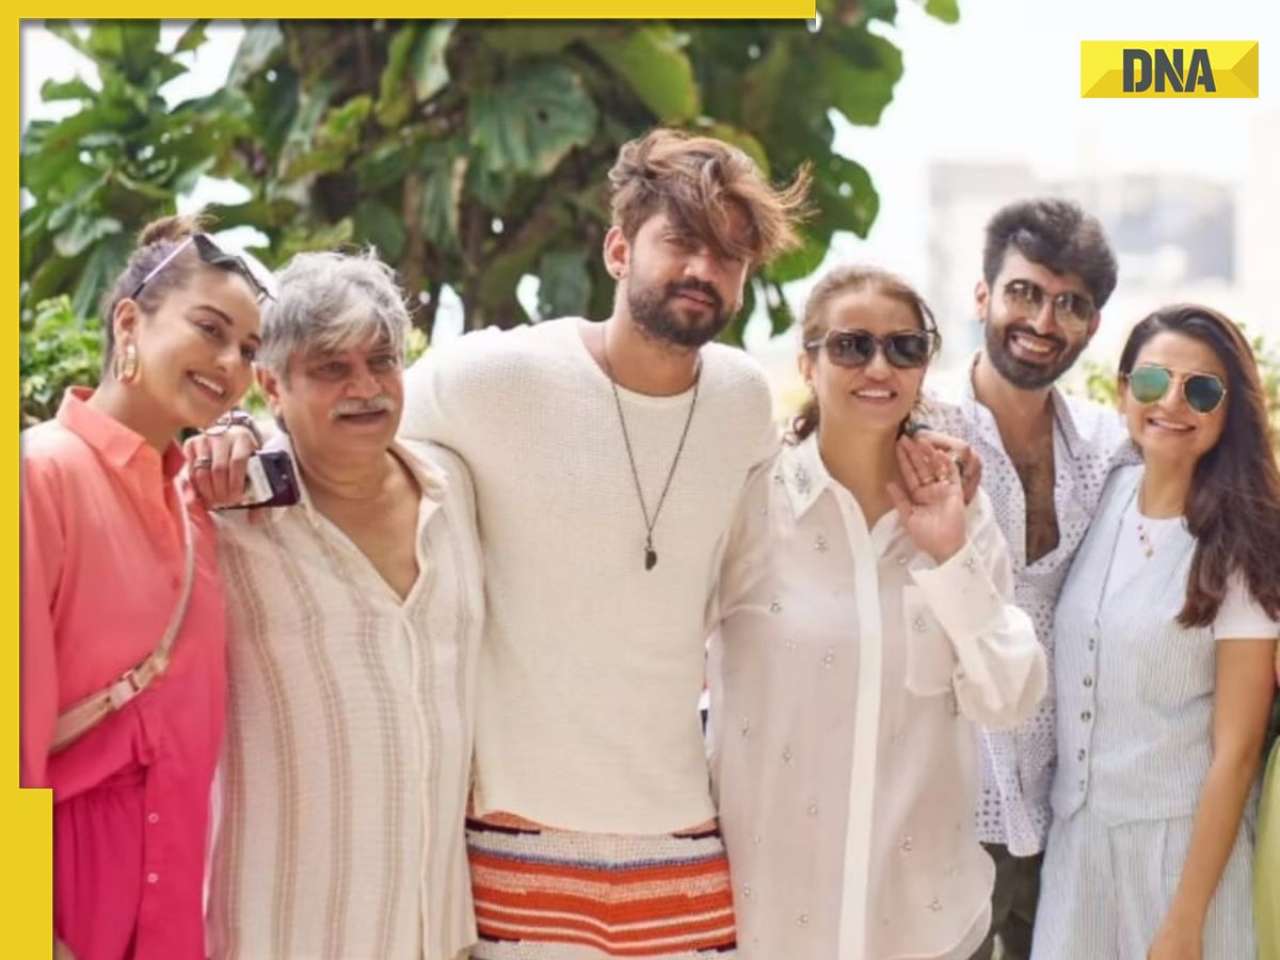 Ahead of Sonakshi Sinha-Zaheer Iqbal's wedding, his sister welcomes actress in family, shares their photo with heart